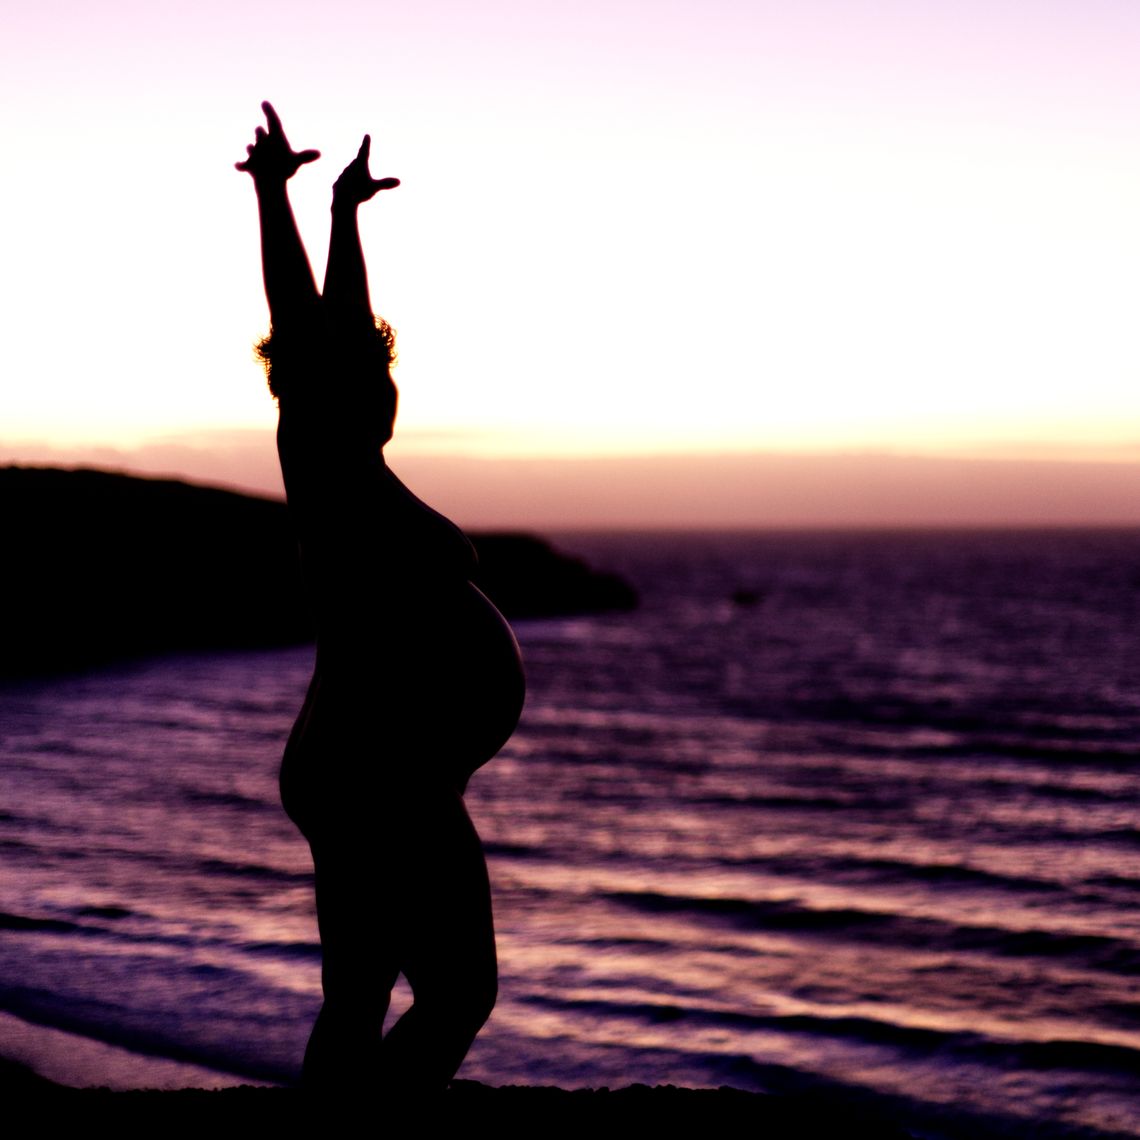 Silhouette of a naked preganant woman against a glowing sky and the ocean.